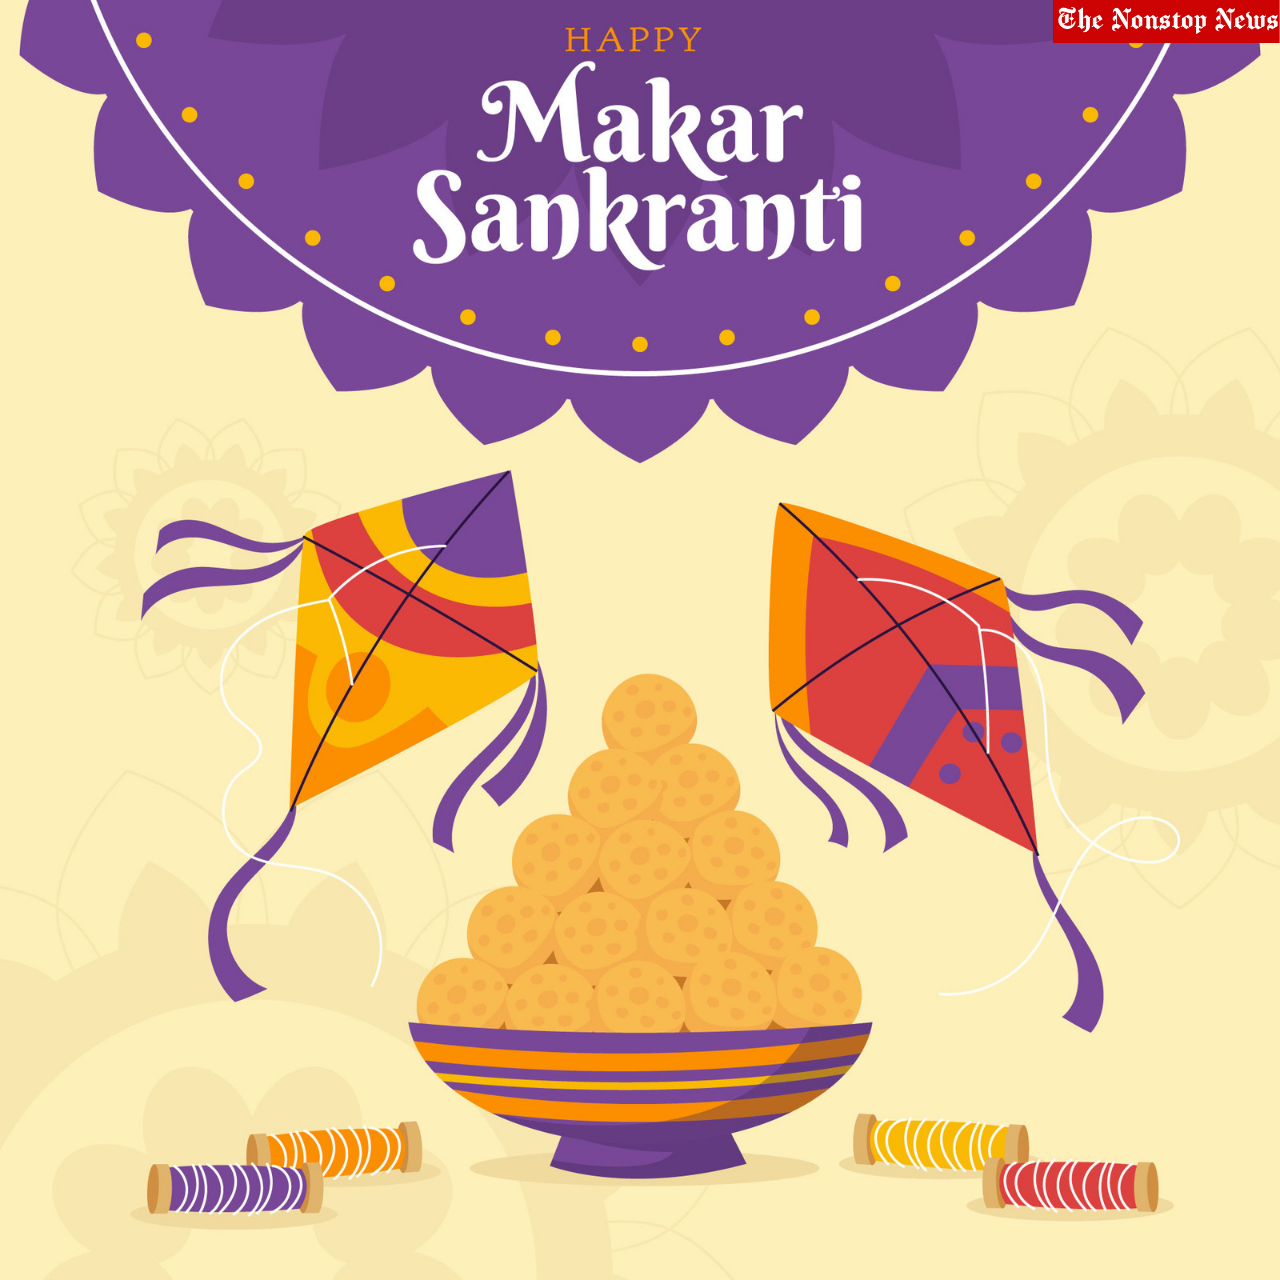 Makar Sankranti 2022 Wishes, HD Images, Quotes, Greetings, Messages to greet your loved ones